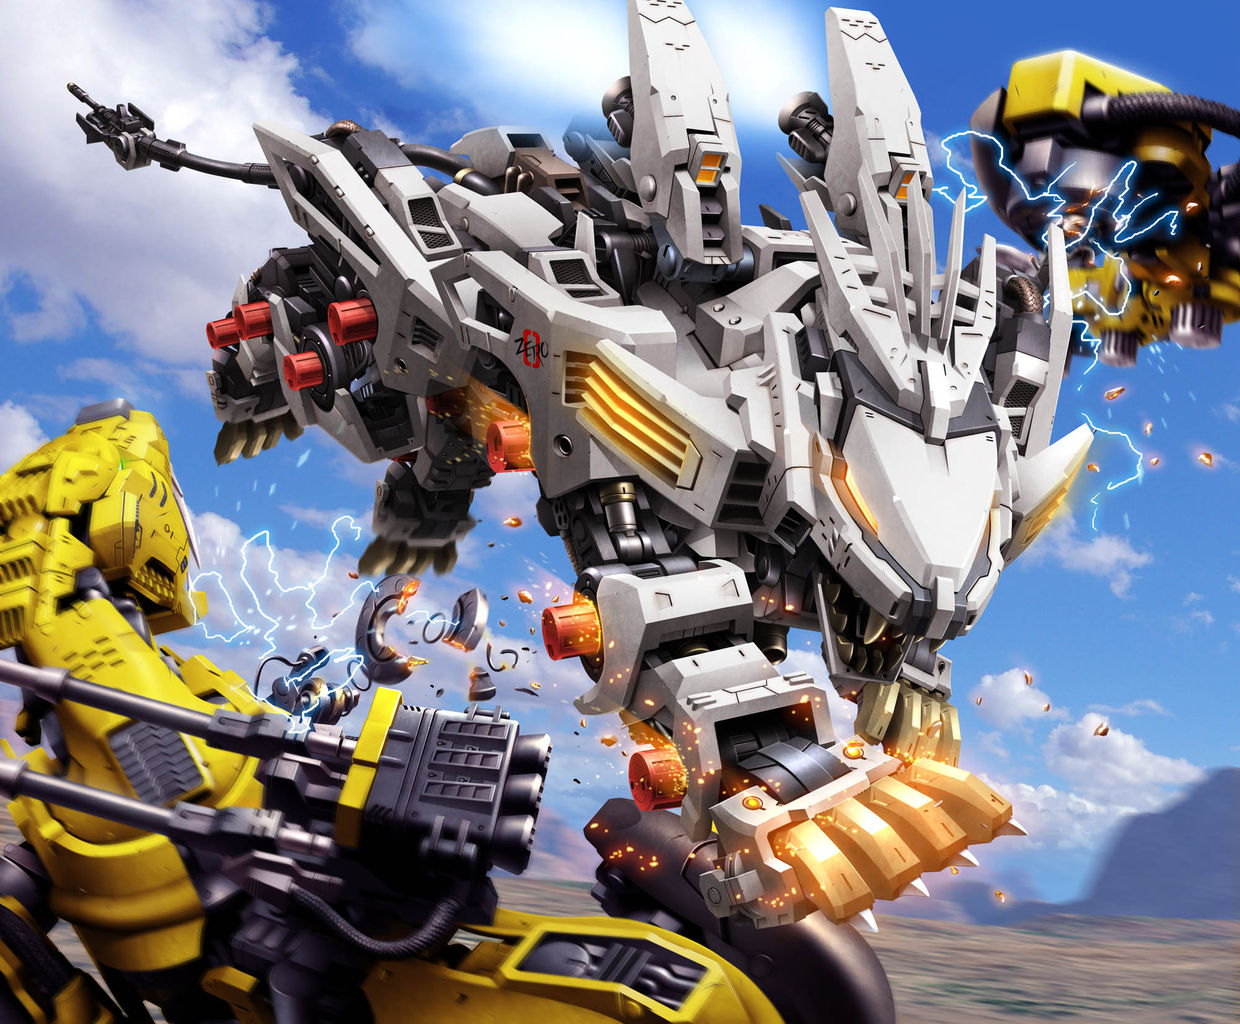 Nice Images Collection: Zoids Desktop Wallpapers